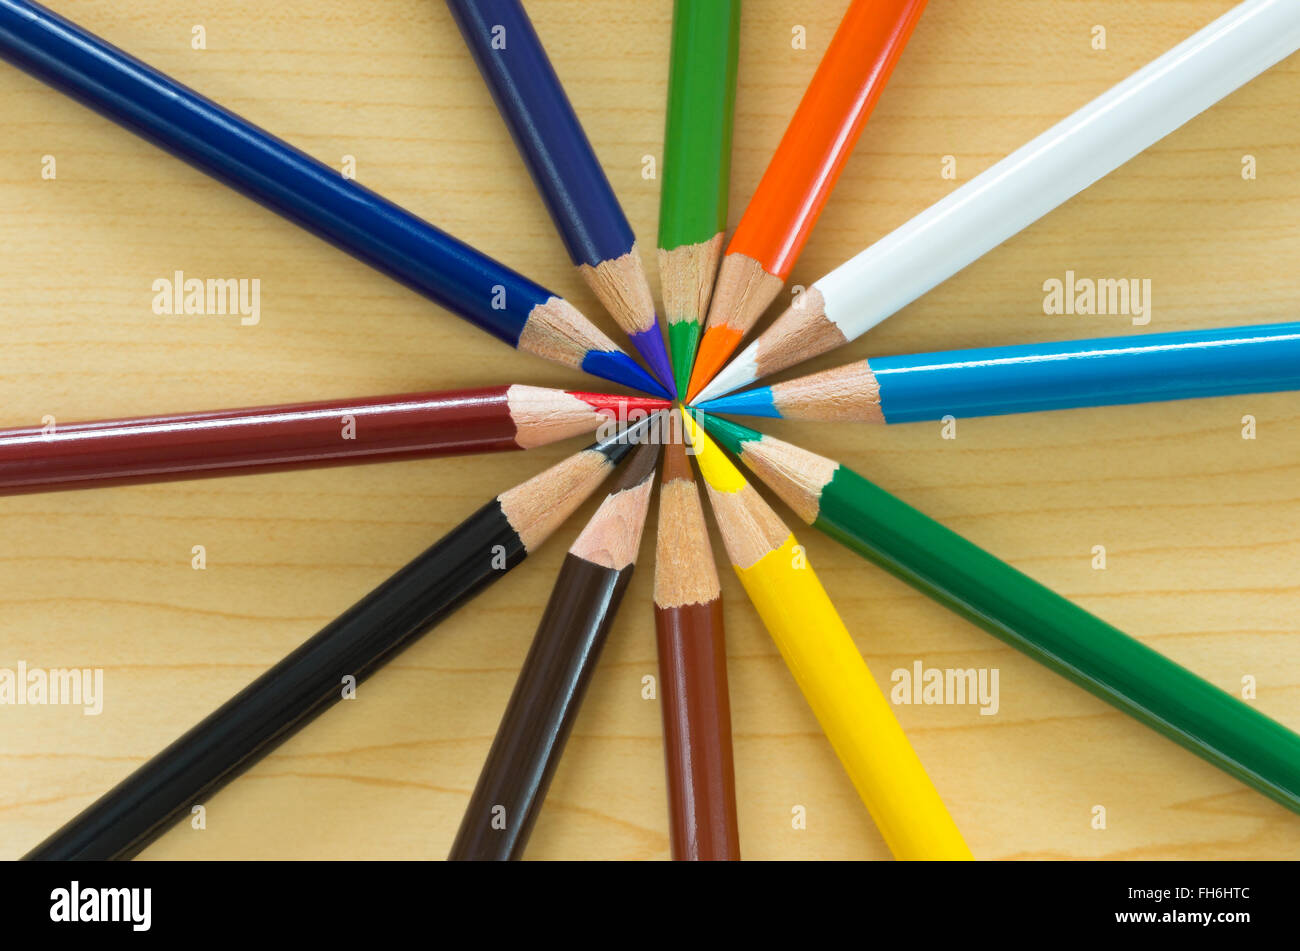 studio still life abstract of art pencils in circle or radial pattern Stock Photo